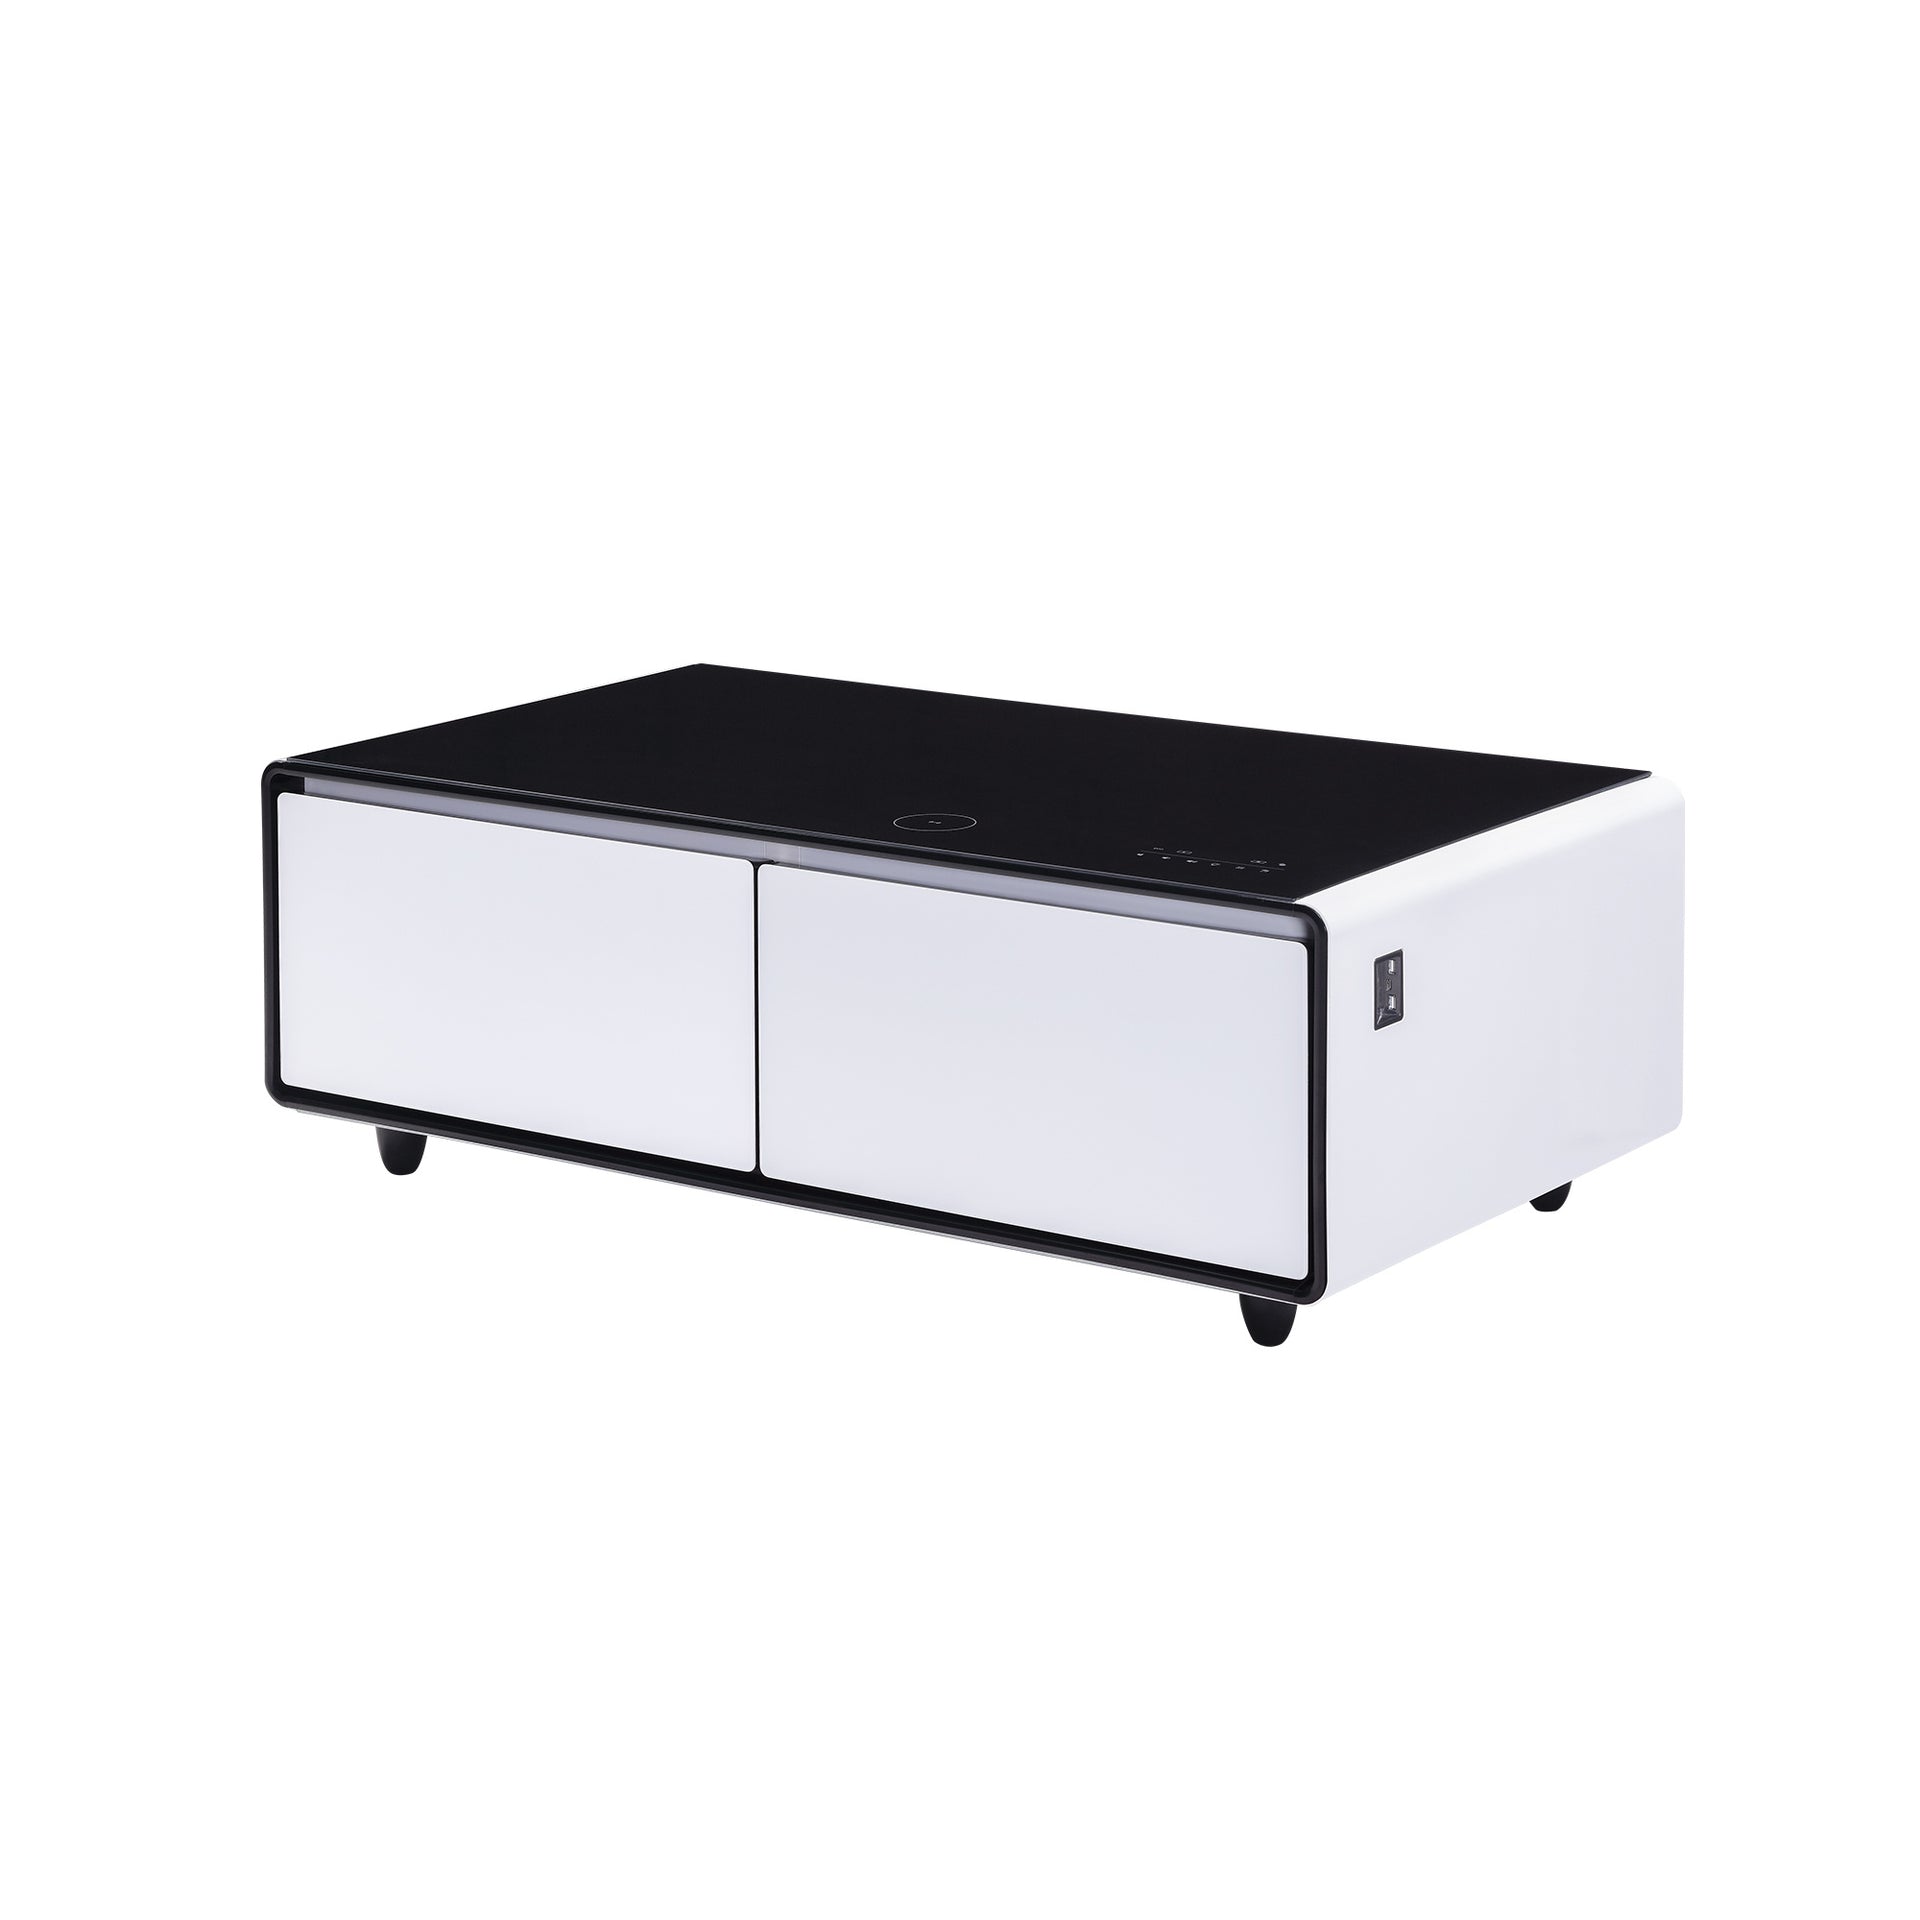 Modern Smart Coffee Table with Built-in Fridge, Wireless Charging and Bluetooth Speaker, White